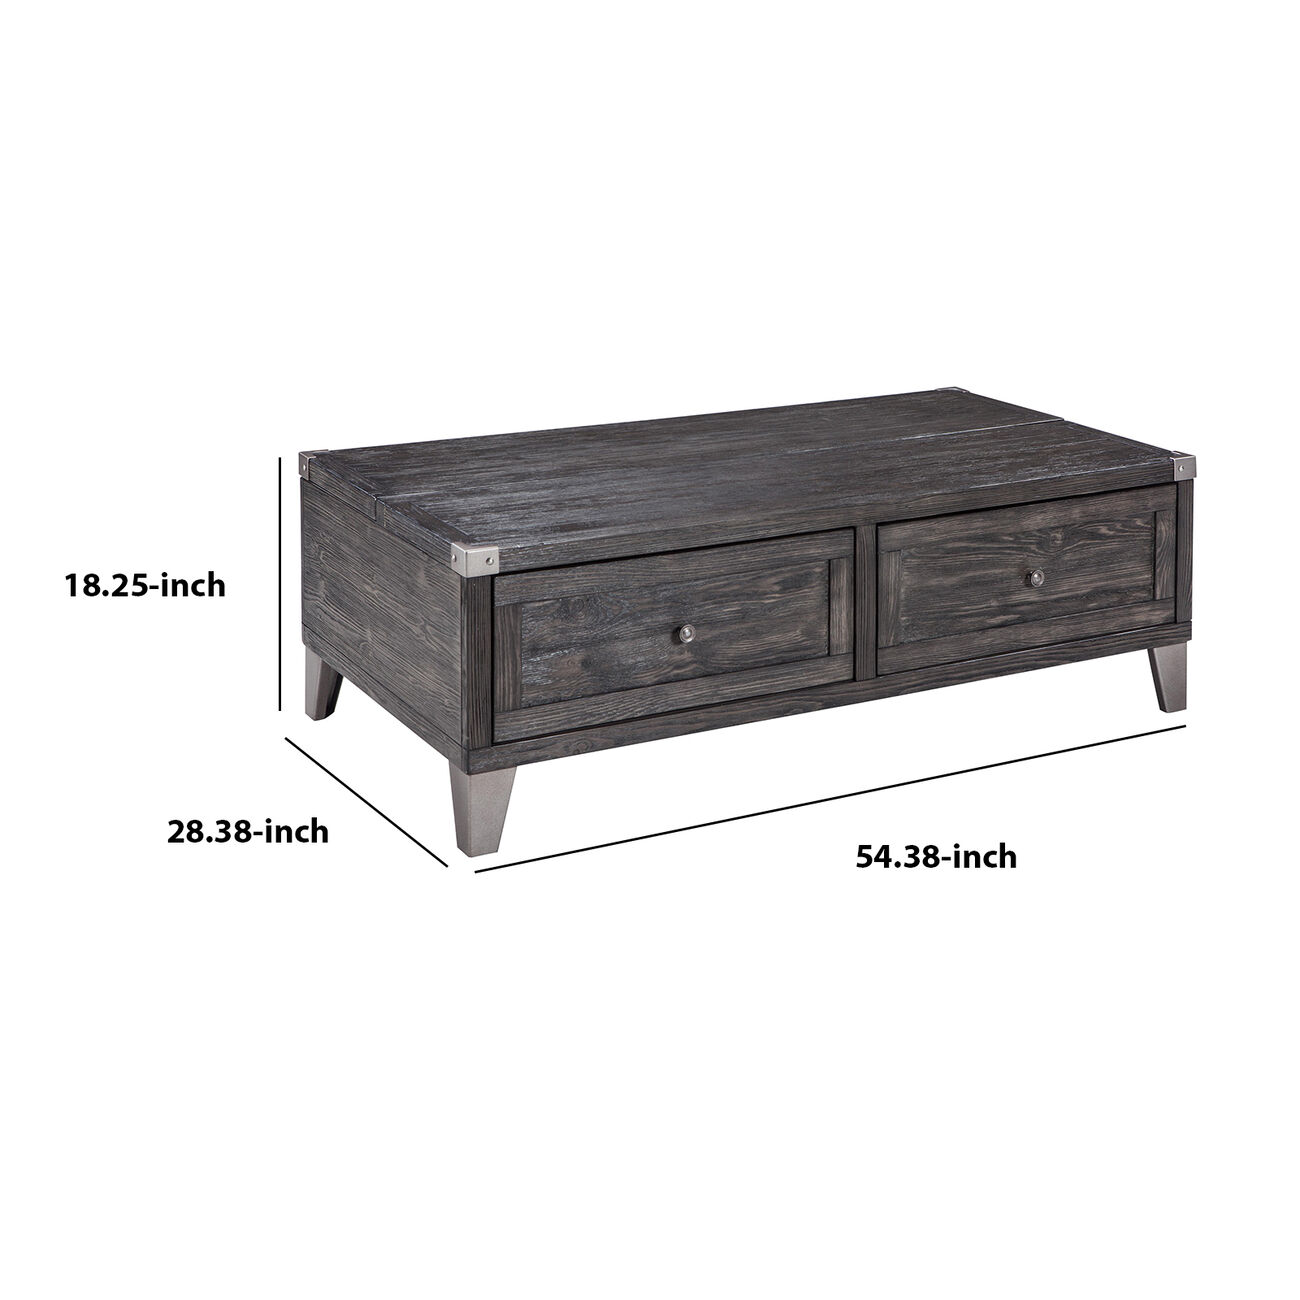 Wooden Lift Top Cocktail Table with 2 Drawers and Metal Accents, Gray